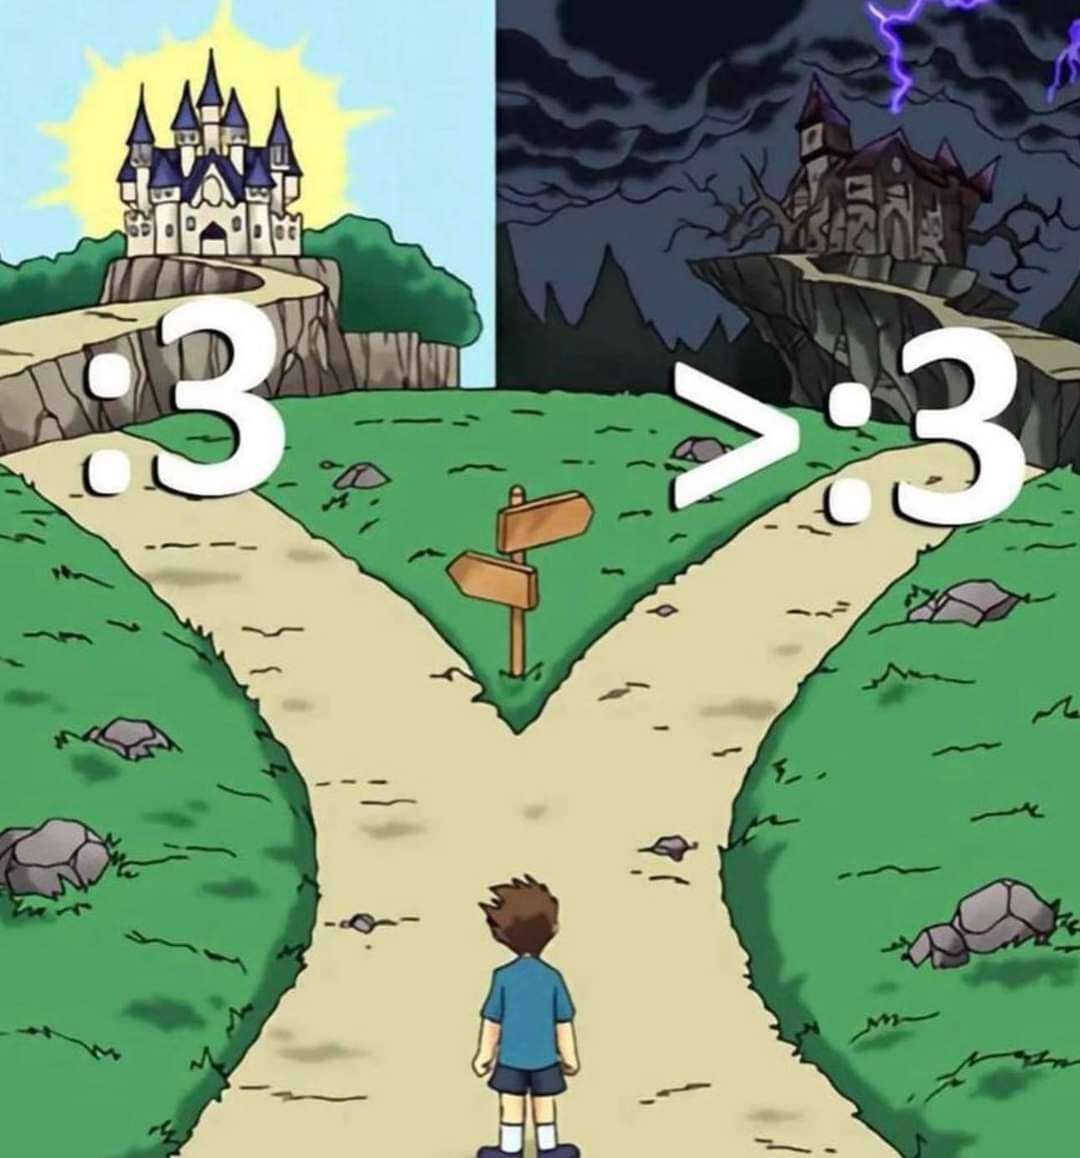 which path do you choose?